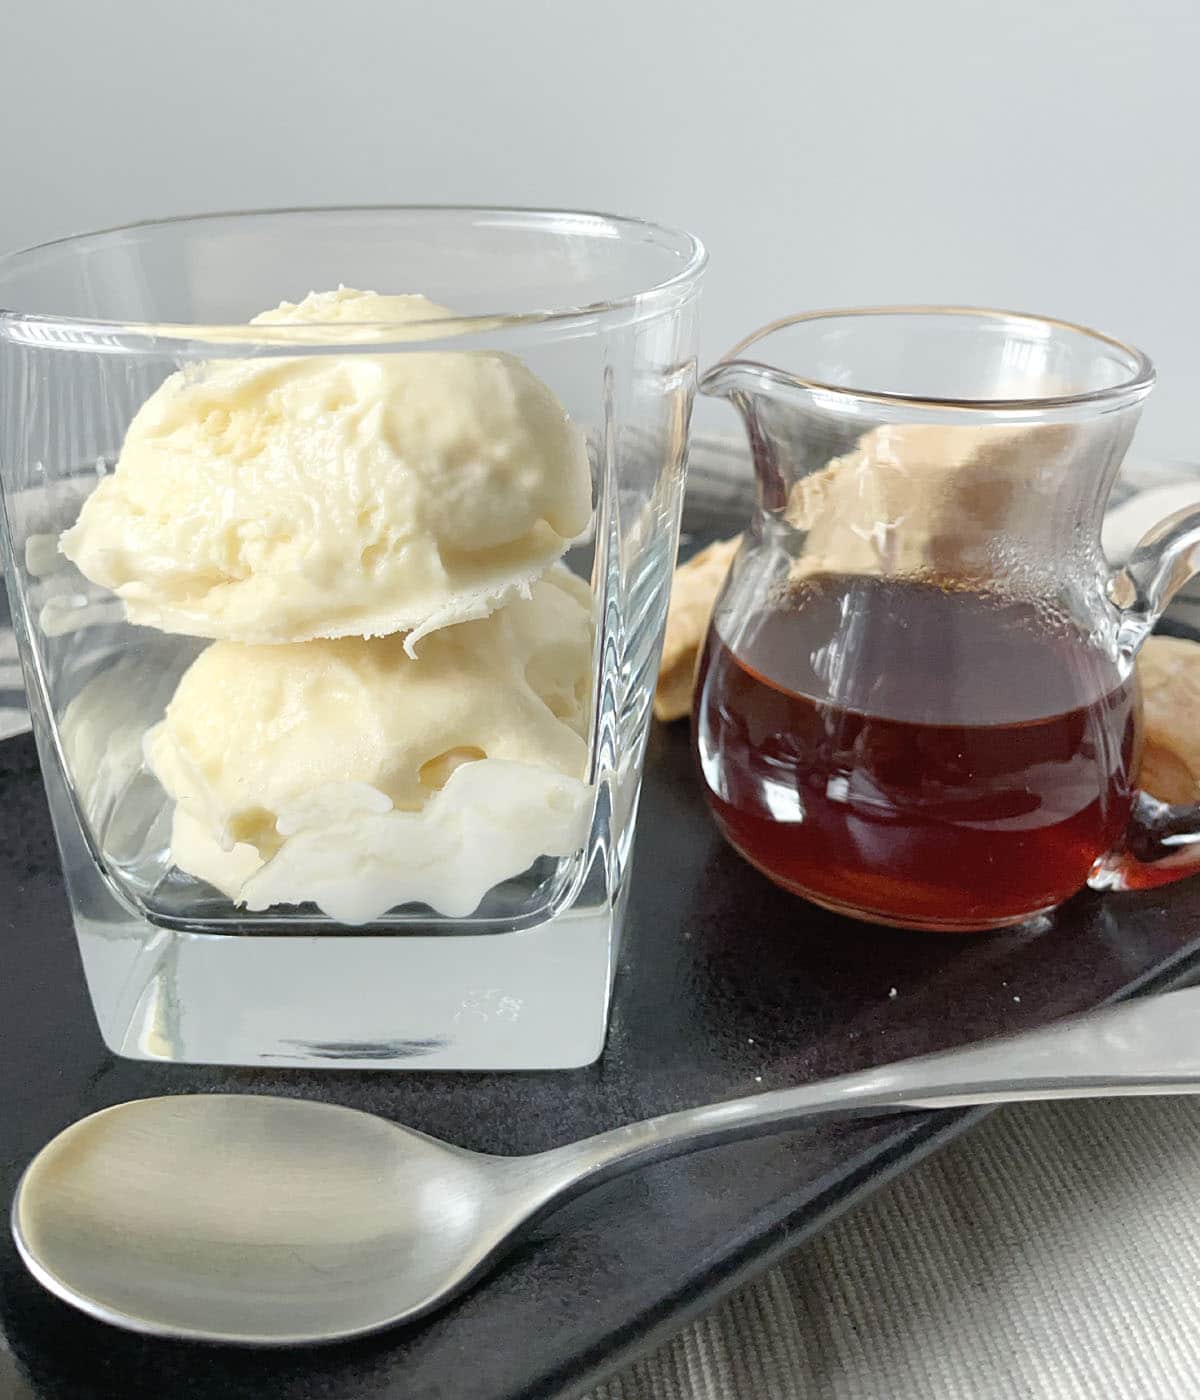 A square glass with two scoops of vanilla ice cream, a small glass pitcher containing brown tea.